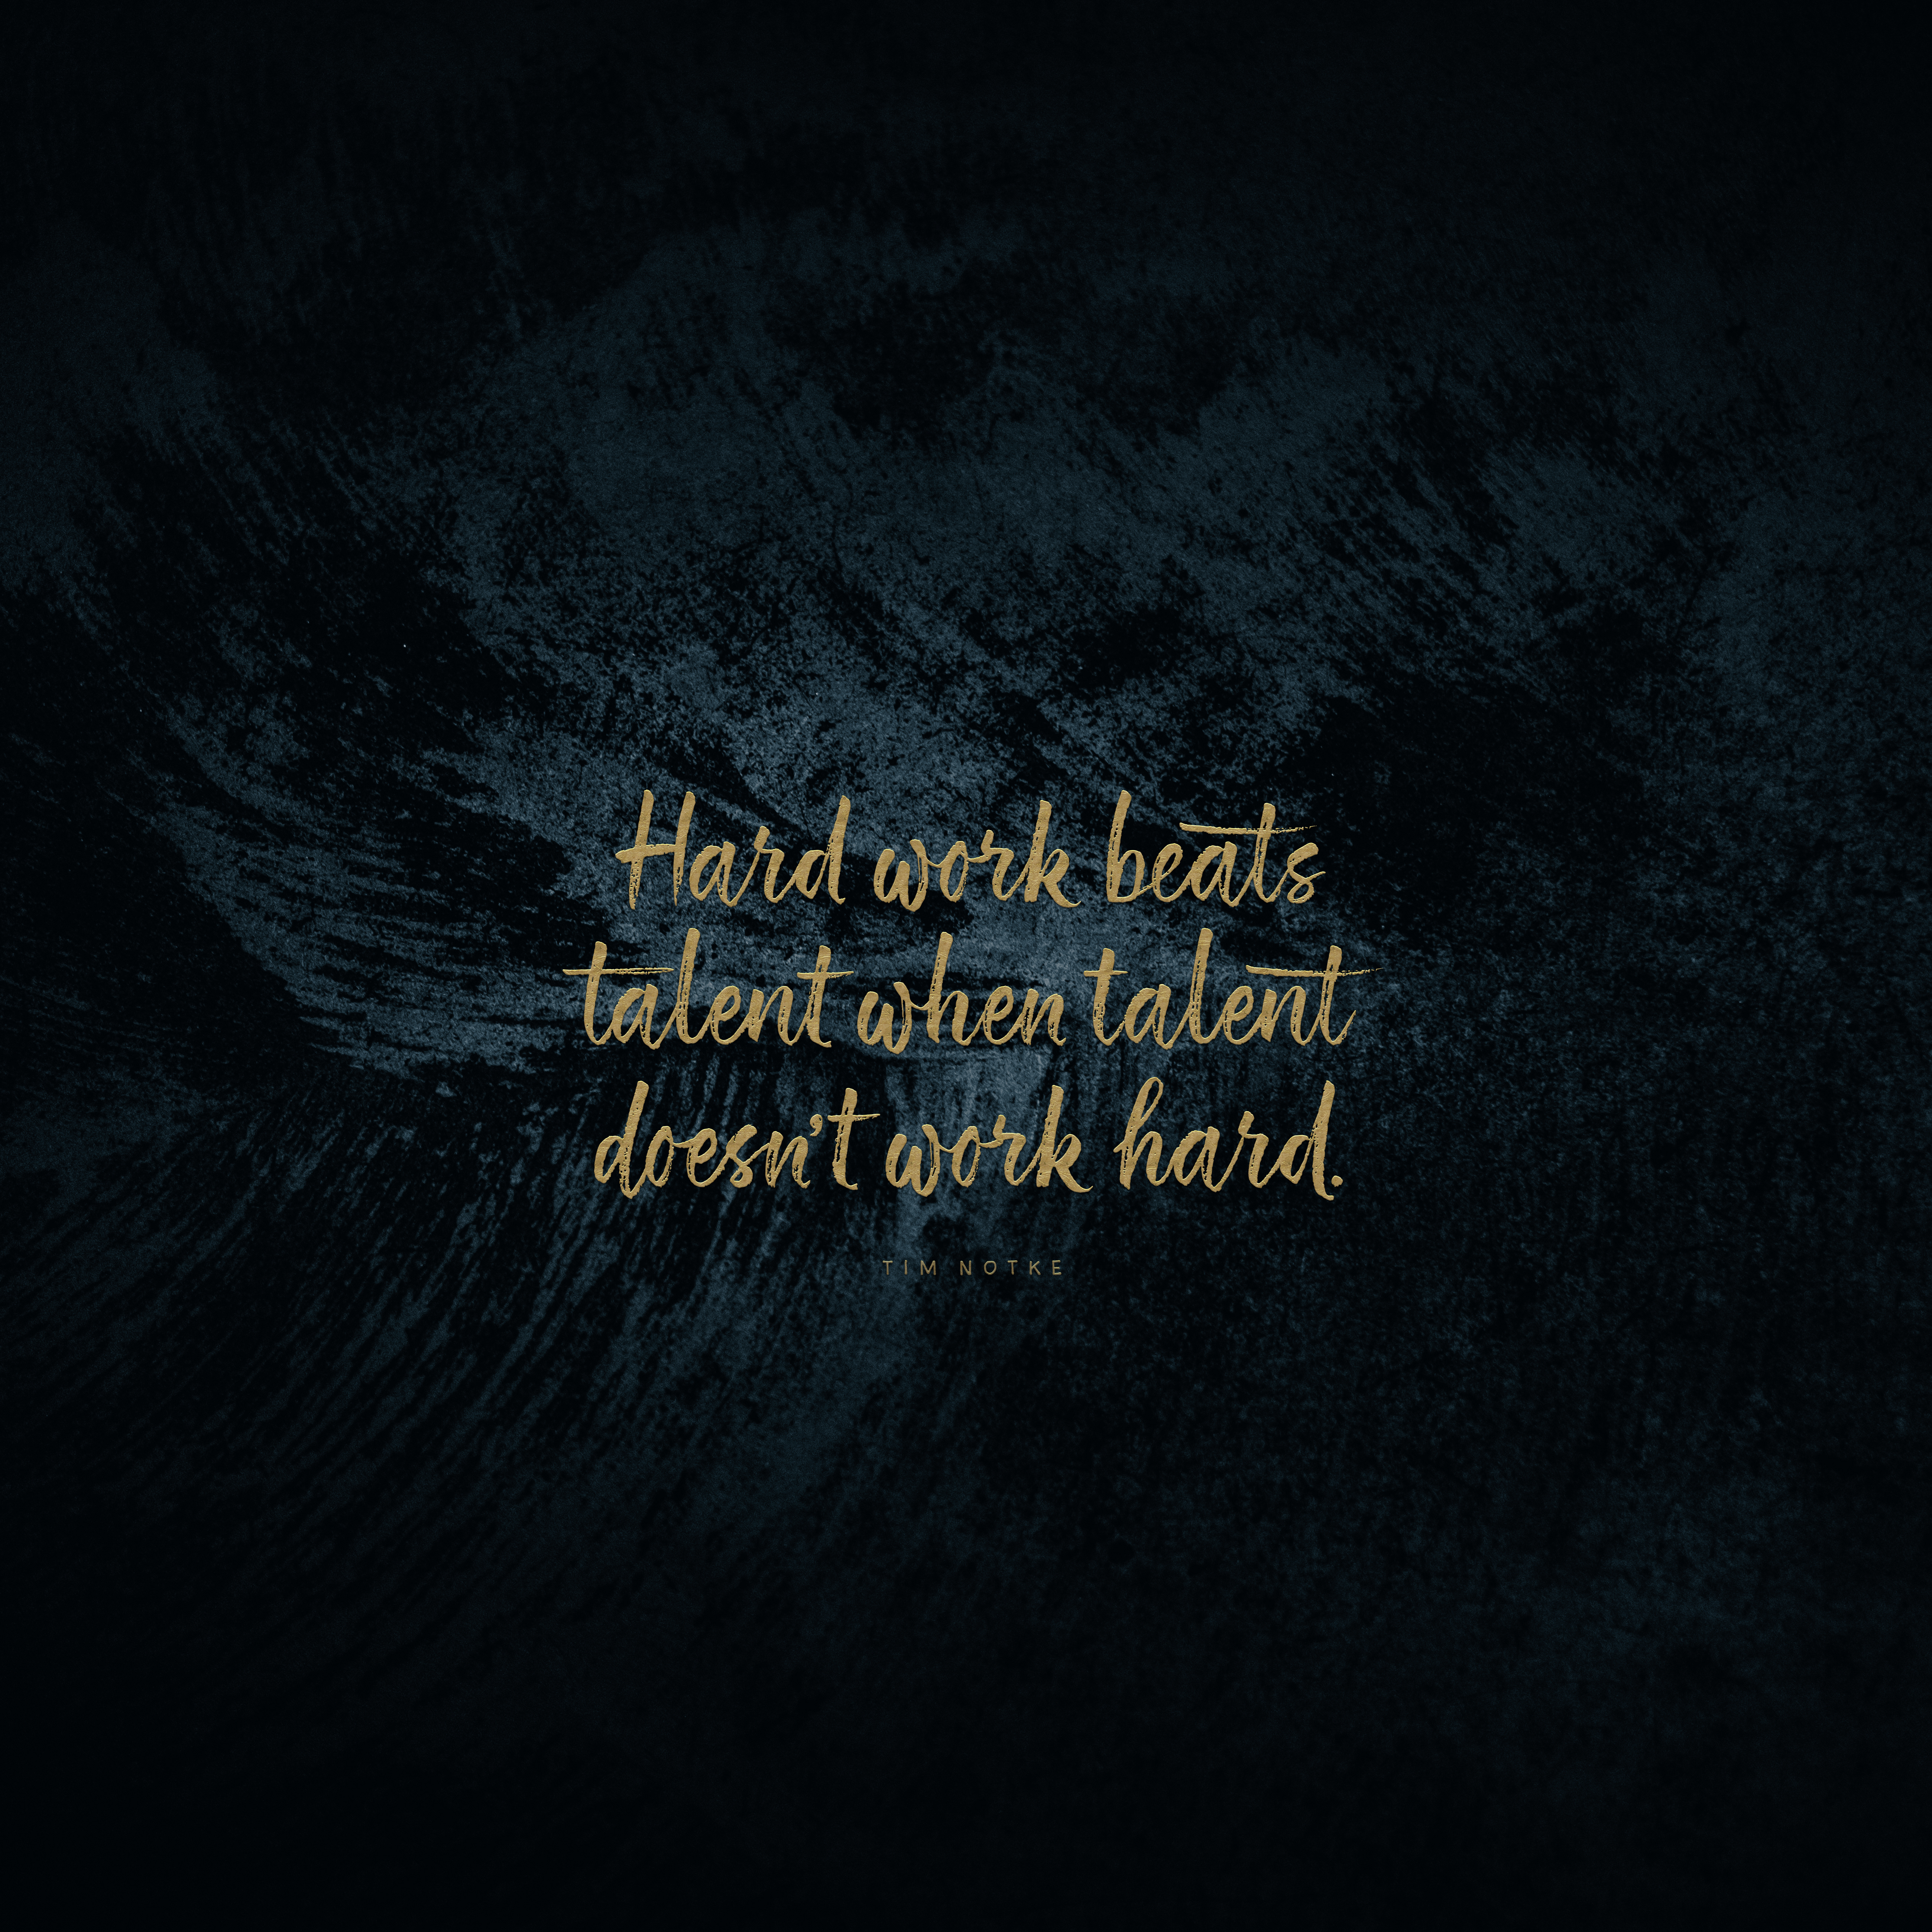 HD wallpaper words, motivation, inspiration, phrase, quote, quotation, work, talent